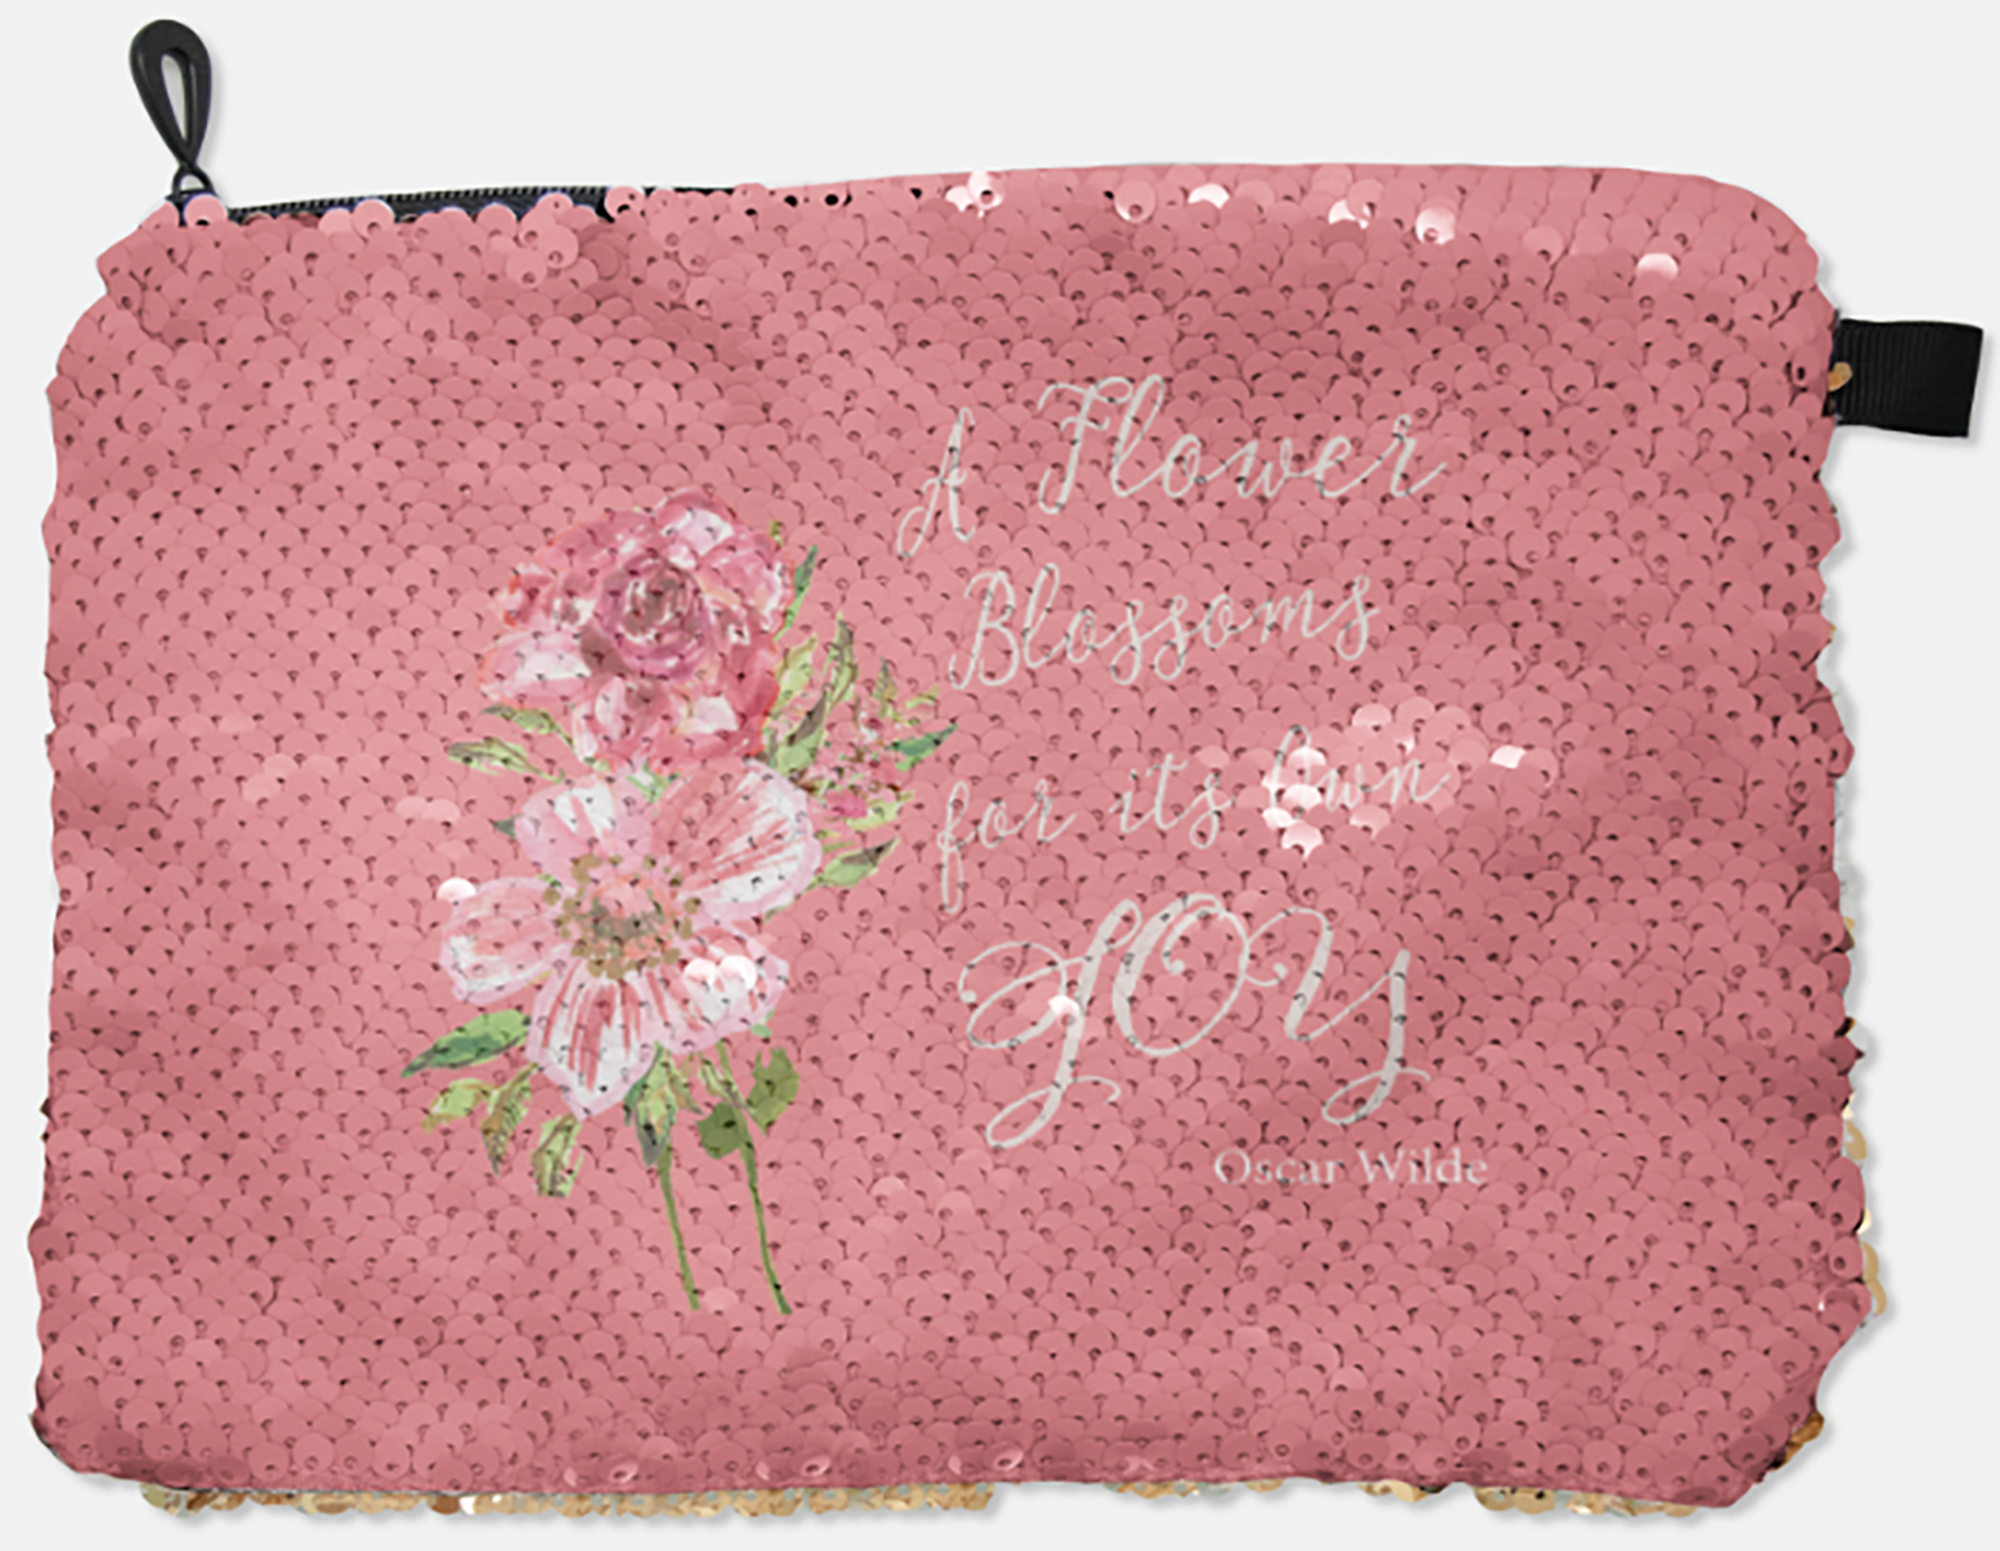 COSMETIC BAG - OSCAR WILDE - A FLOWER BLOSSOMS / SILVER SEQUINS - Dreams After All